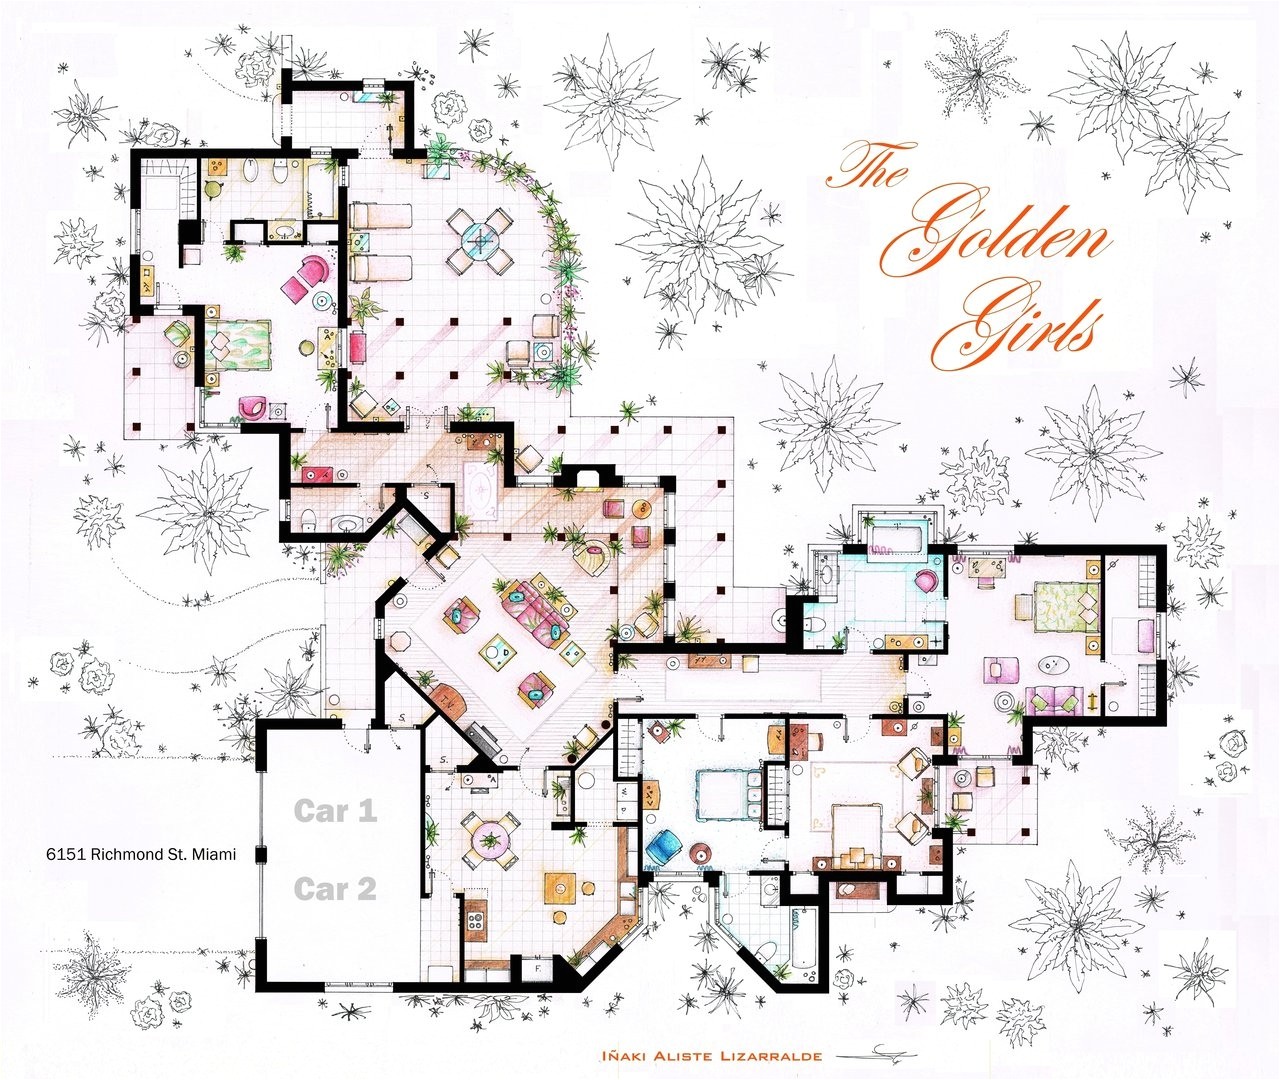 Golden Homes Plans Floor Plans Of Homes From Famous Tv Shows